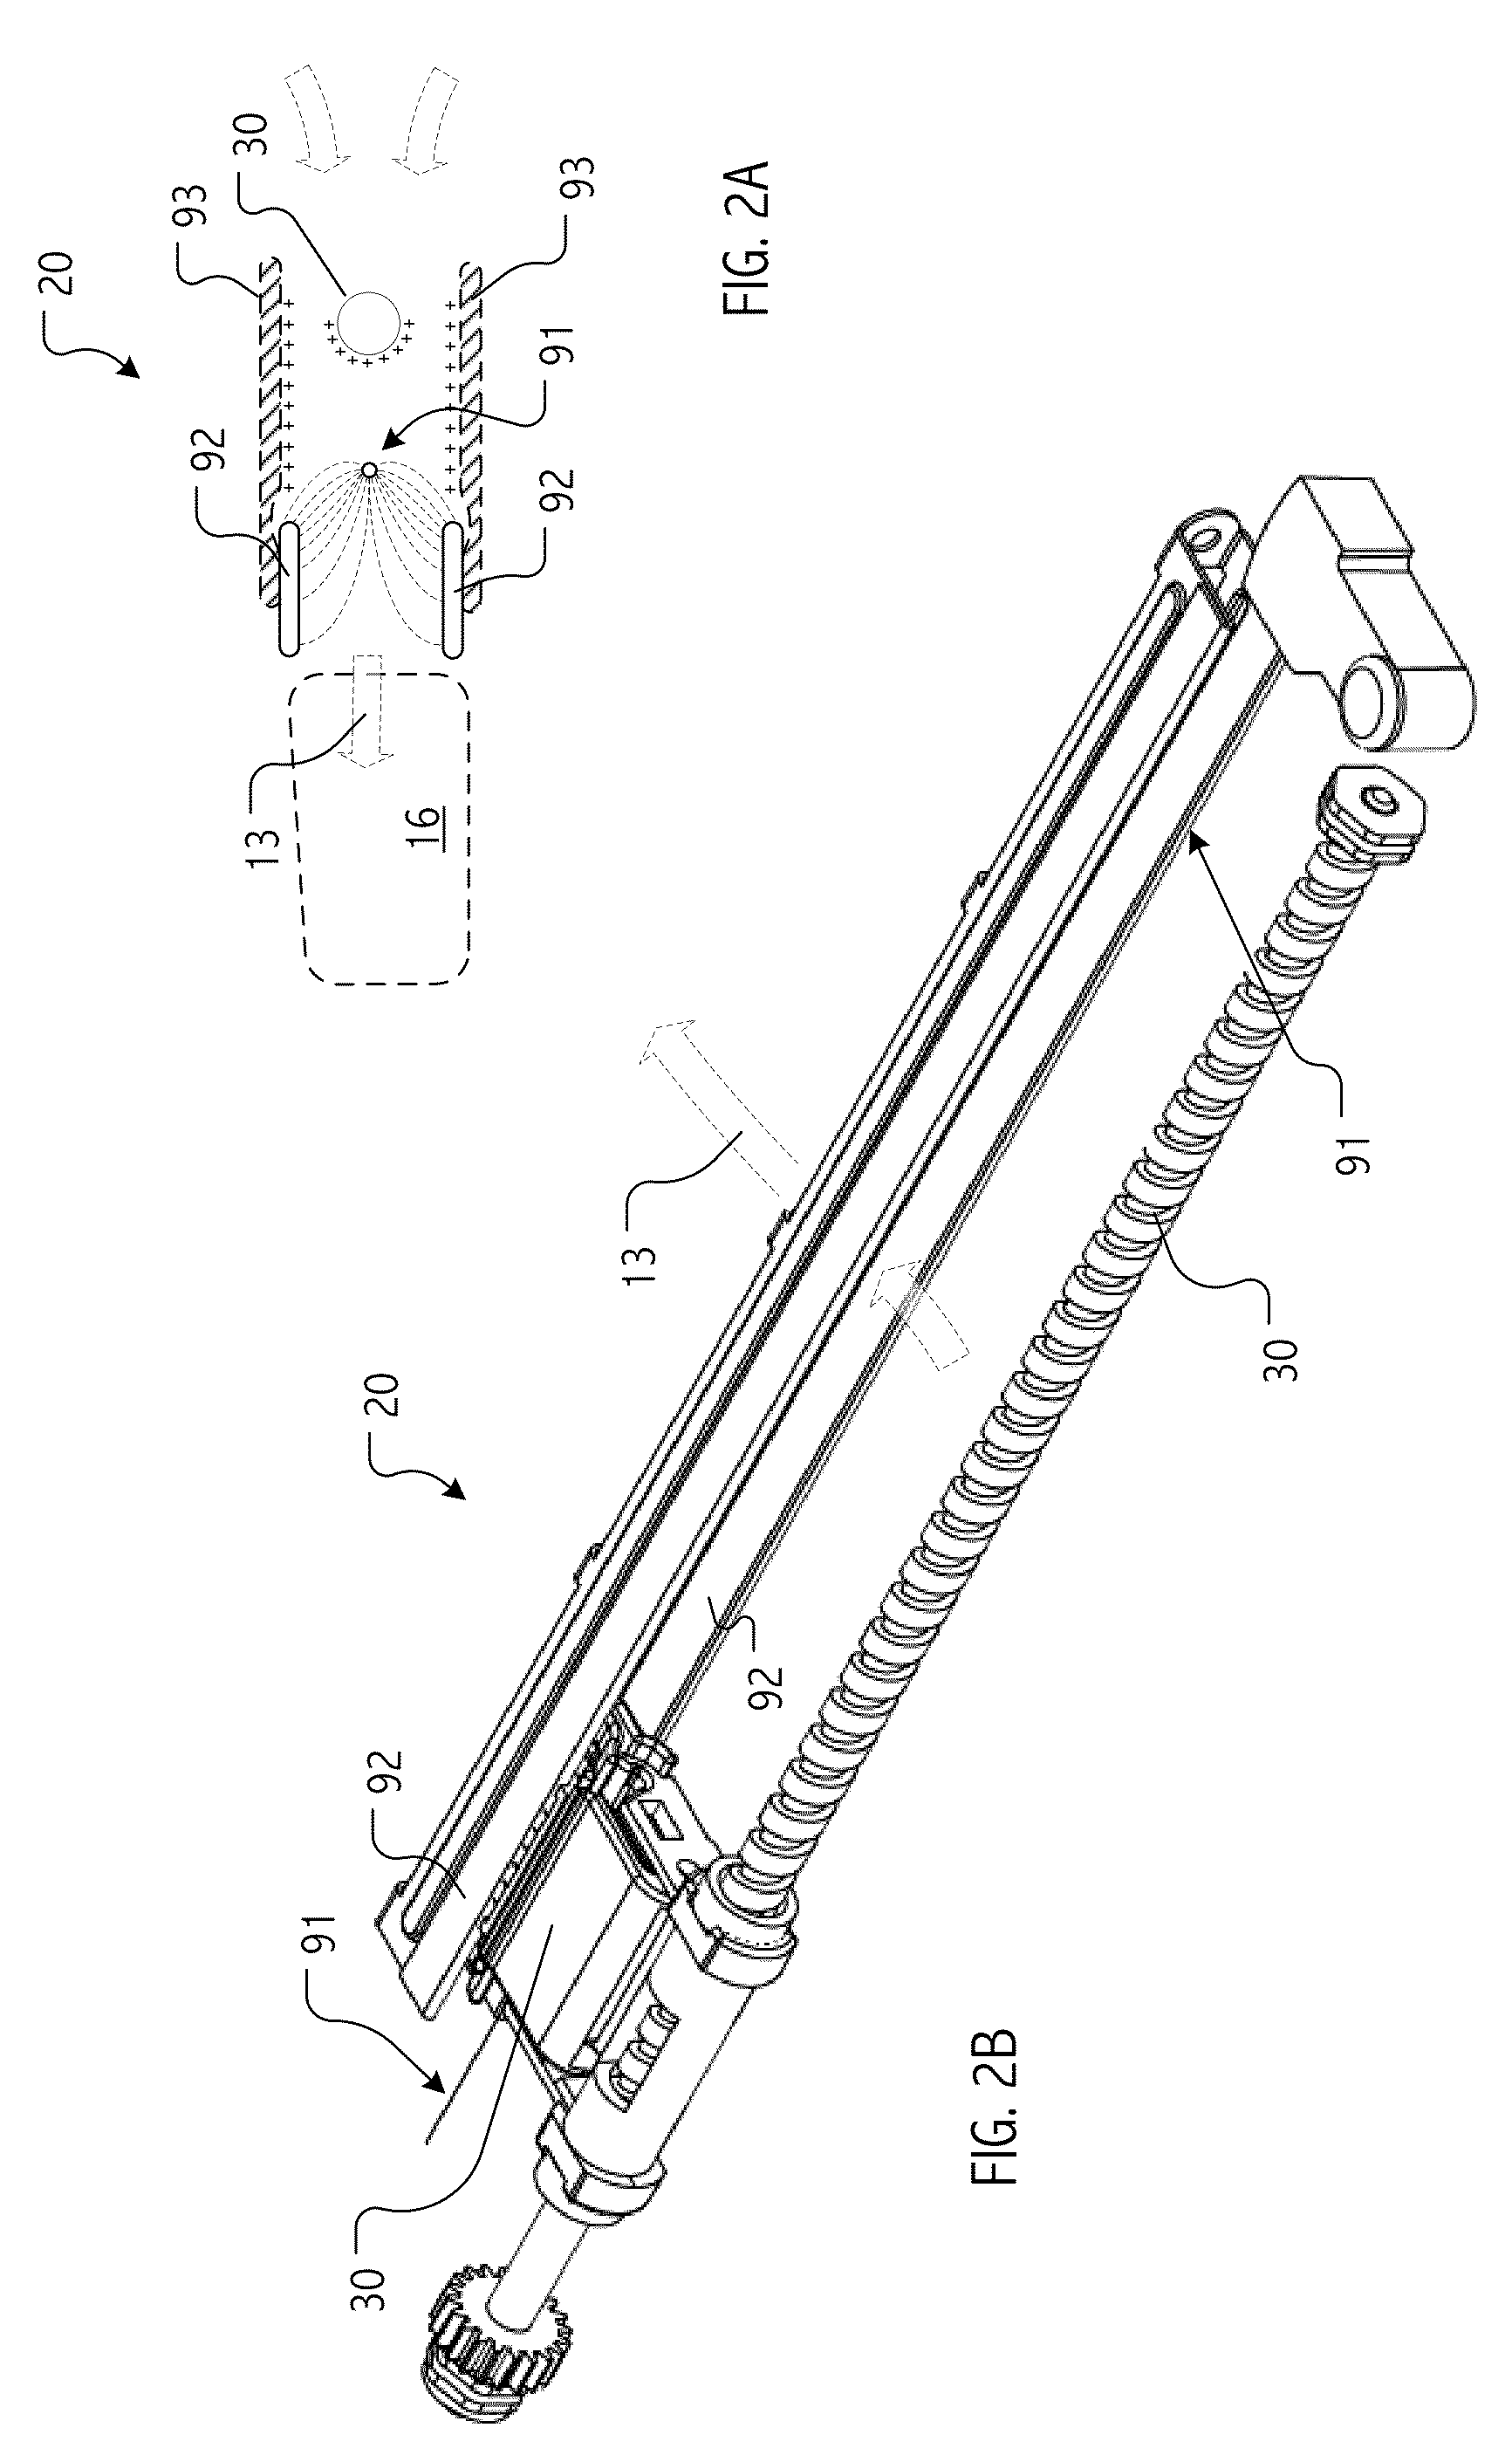 System and method for in-situ conditioning of emitter electrode with silver